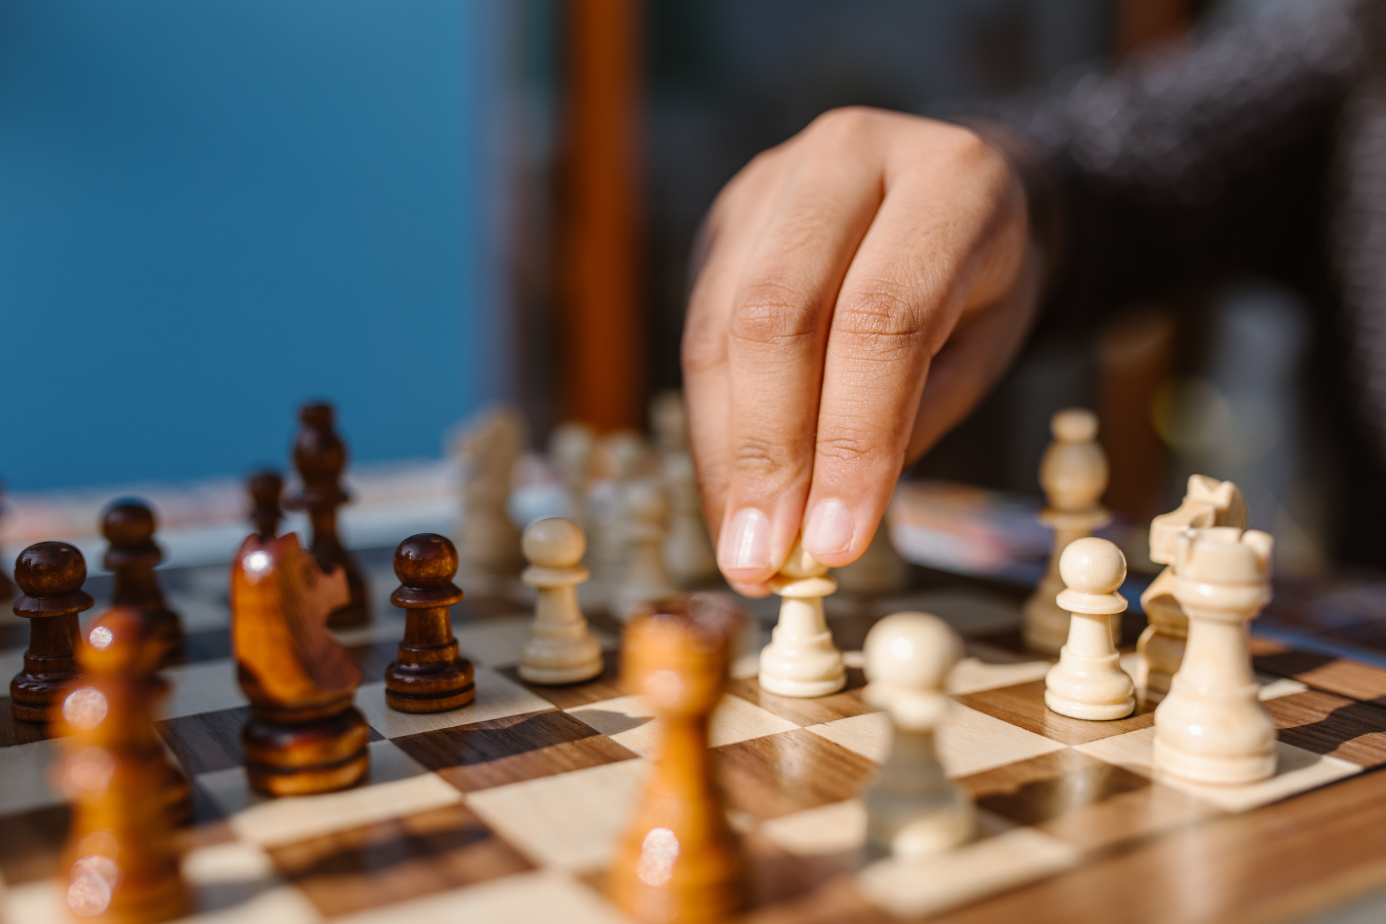 A hand is moving a pawn piece on a chessboard.